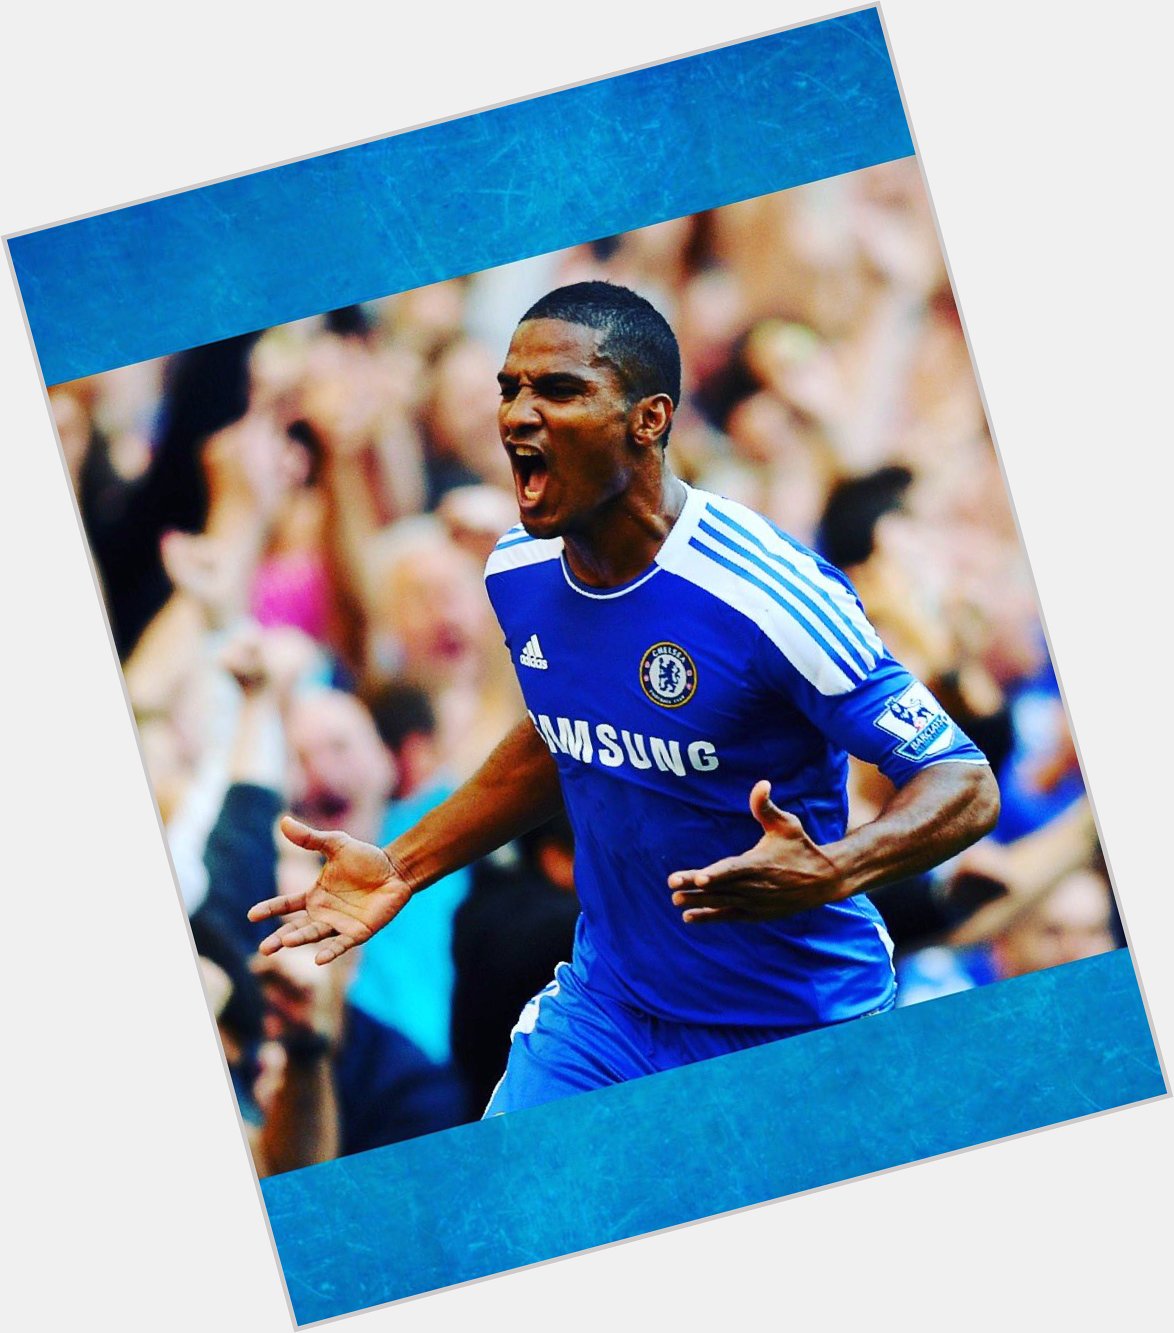 Happy 39th Birthday to former player Florent Malouda. 